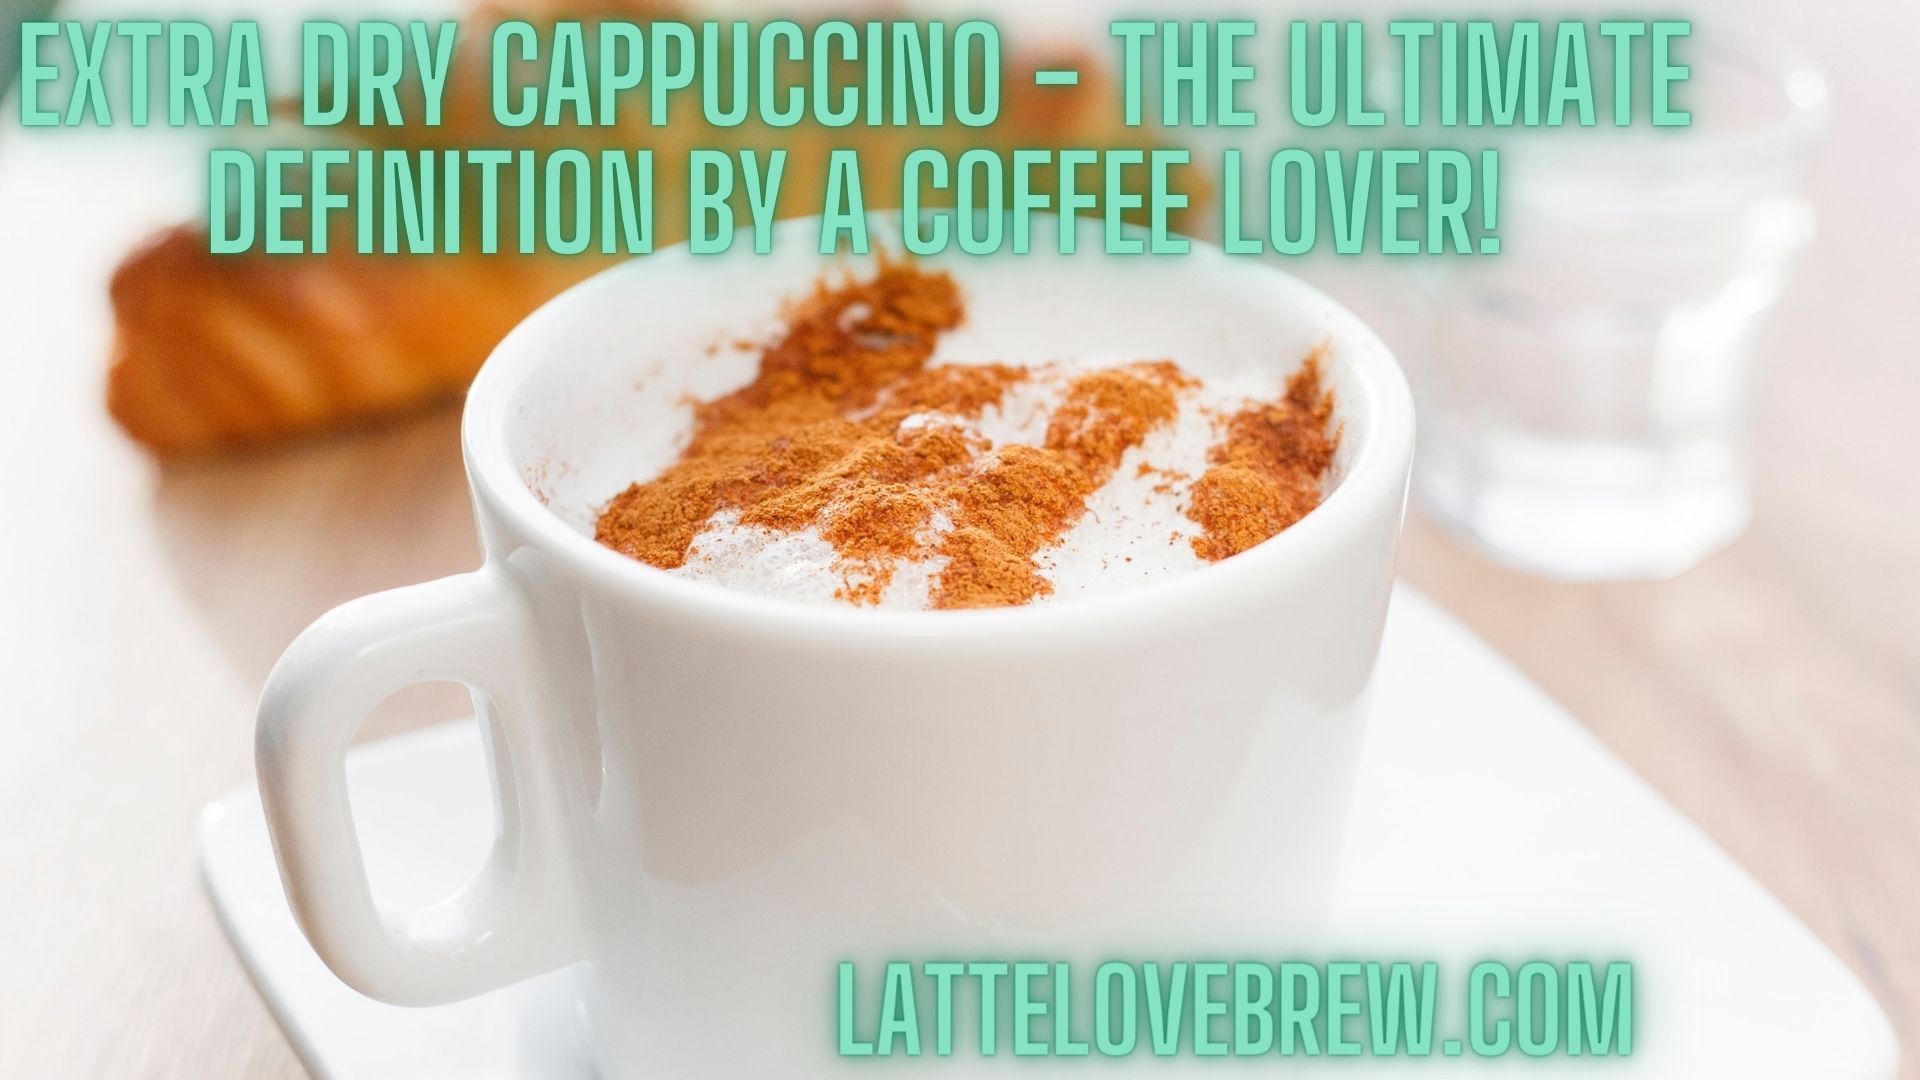 Extra Dry Cappuccino - The Ultimate Definition By A Coffee Lover